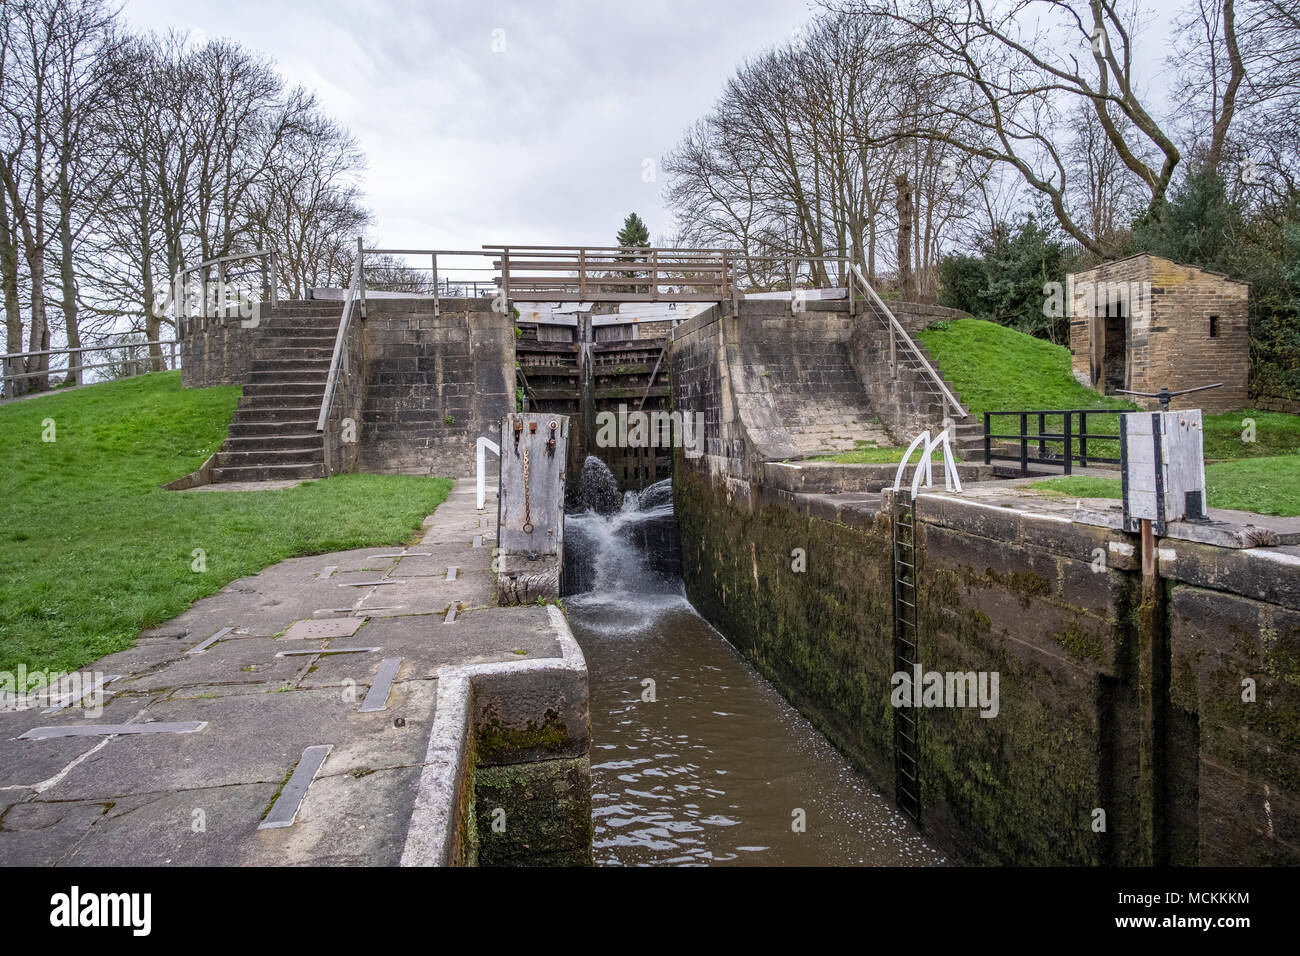 The Five Rise Locks on the Leeds and Liverpool Canal,  Bingley, near Bradford, West Yorkshire, England. Stock Photo